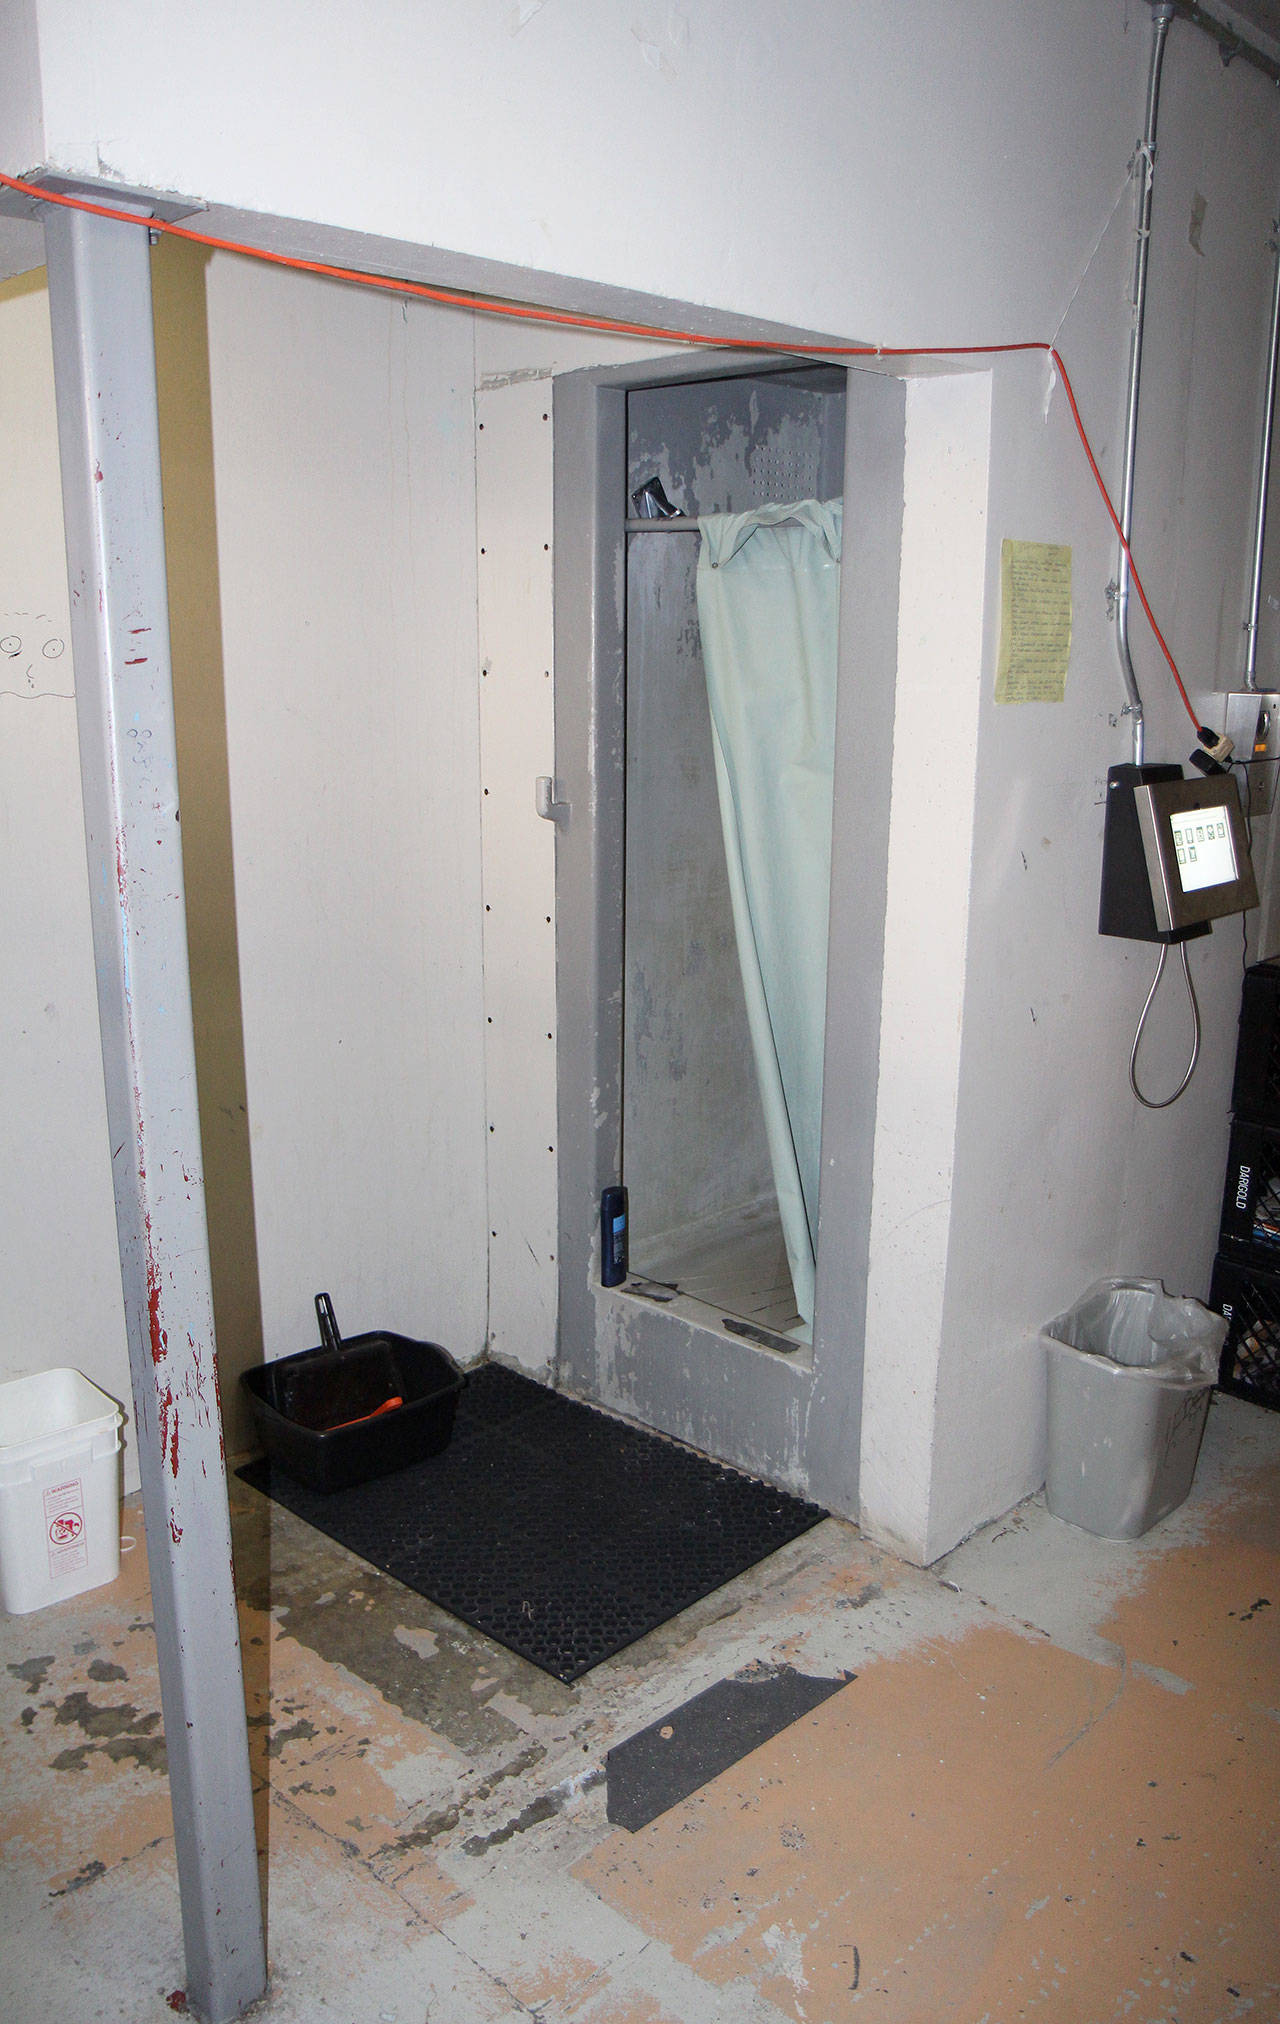 The shower in the area that houses the kitchen detail at the Grays Harbor County Correctional Facility in Montesano has seen better days. Photo taken Nov. 15, 2019. (Michael Lang | Grays Harbor News Group)